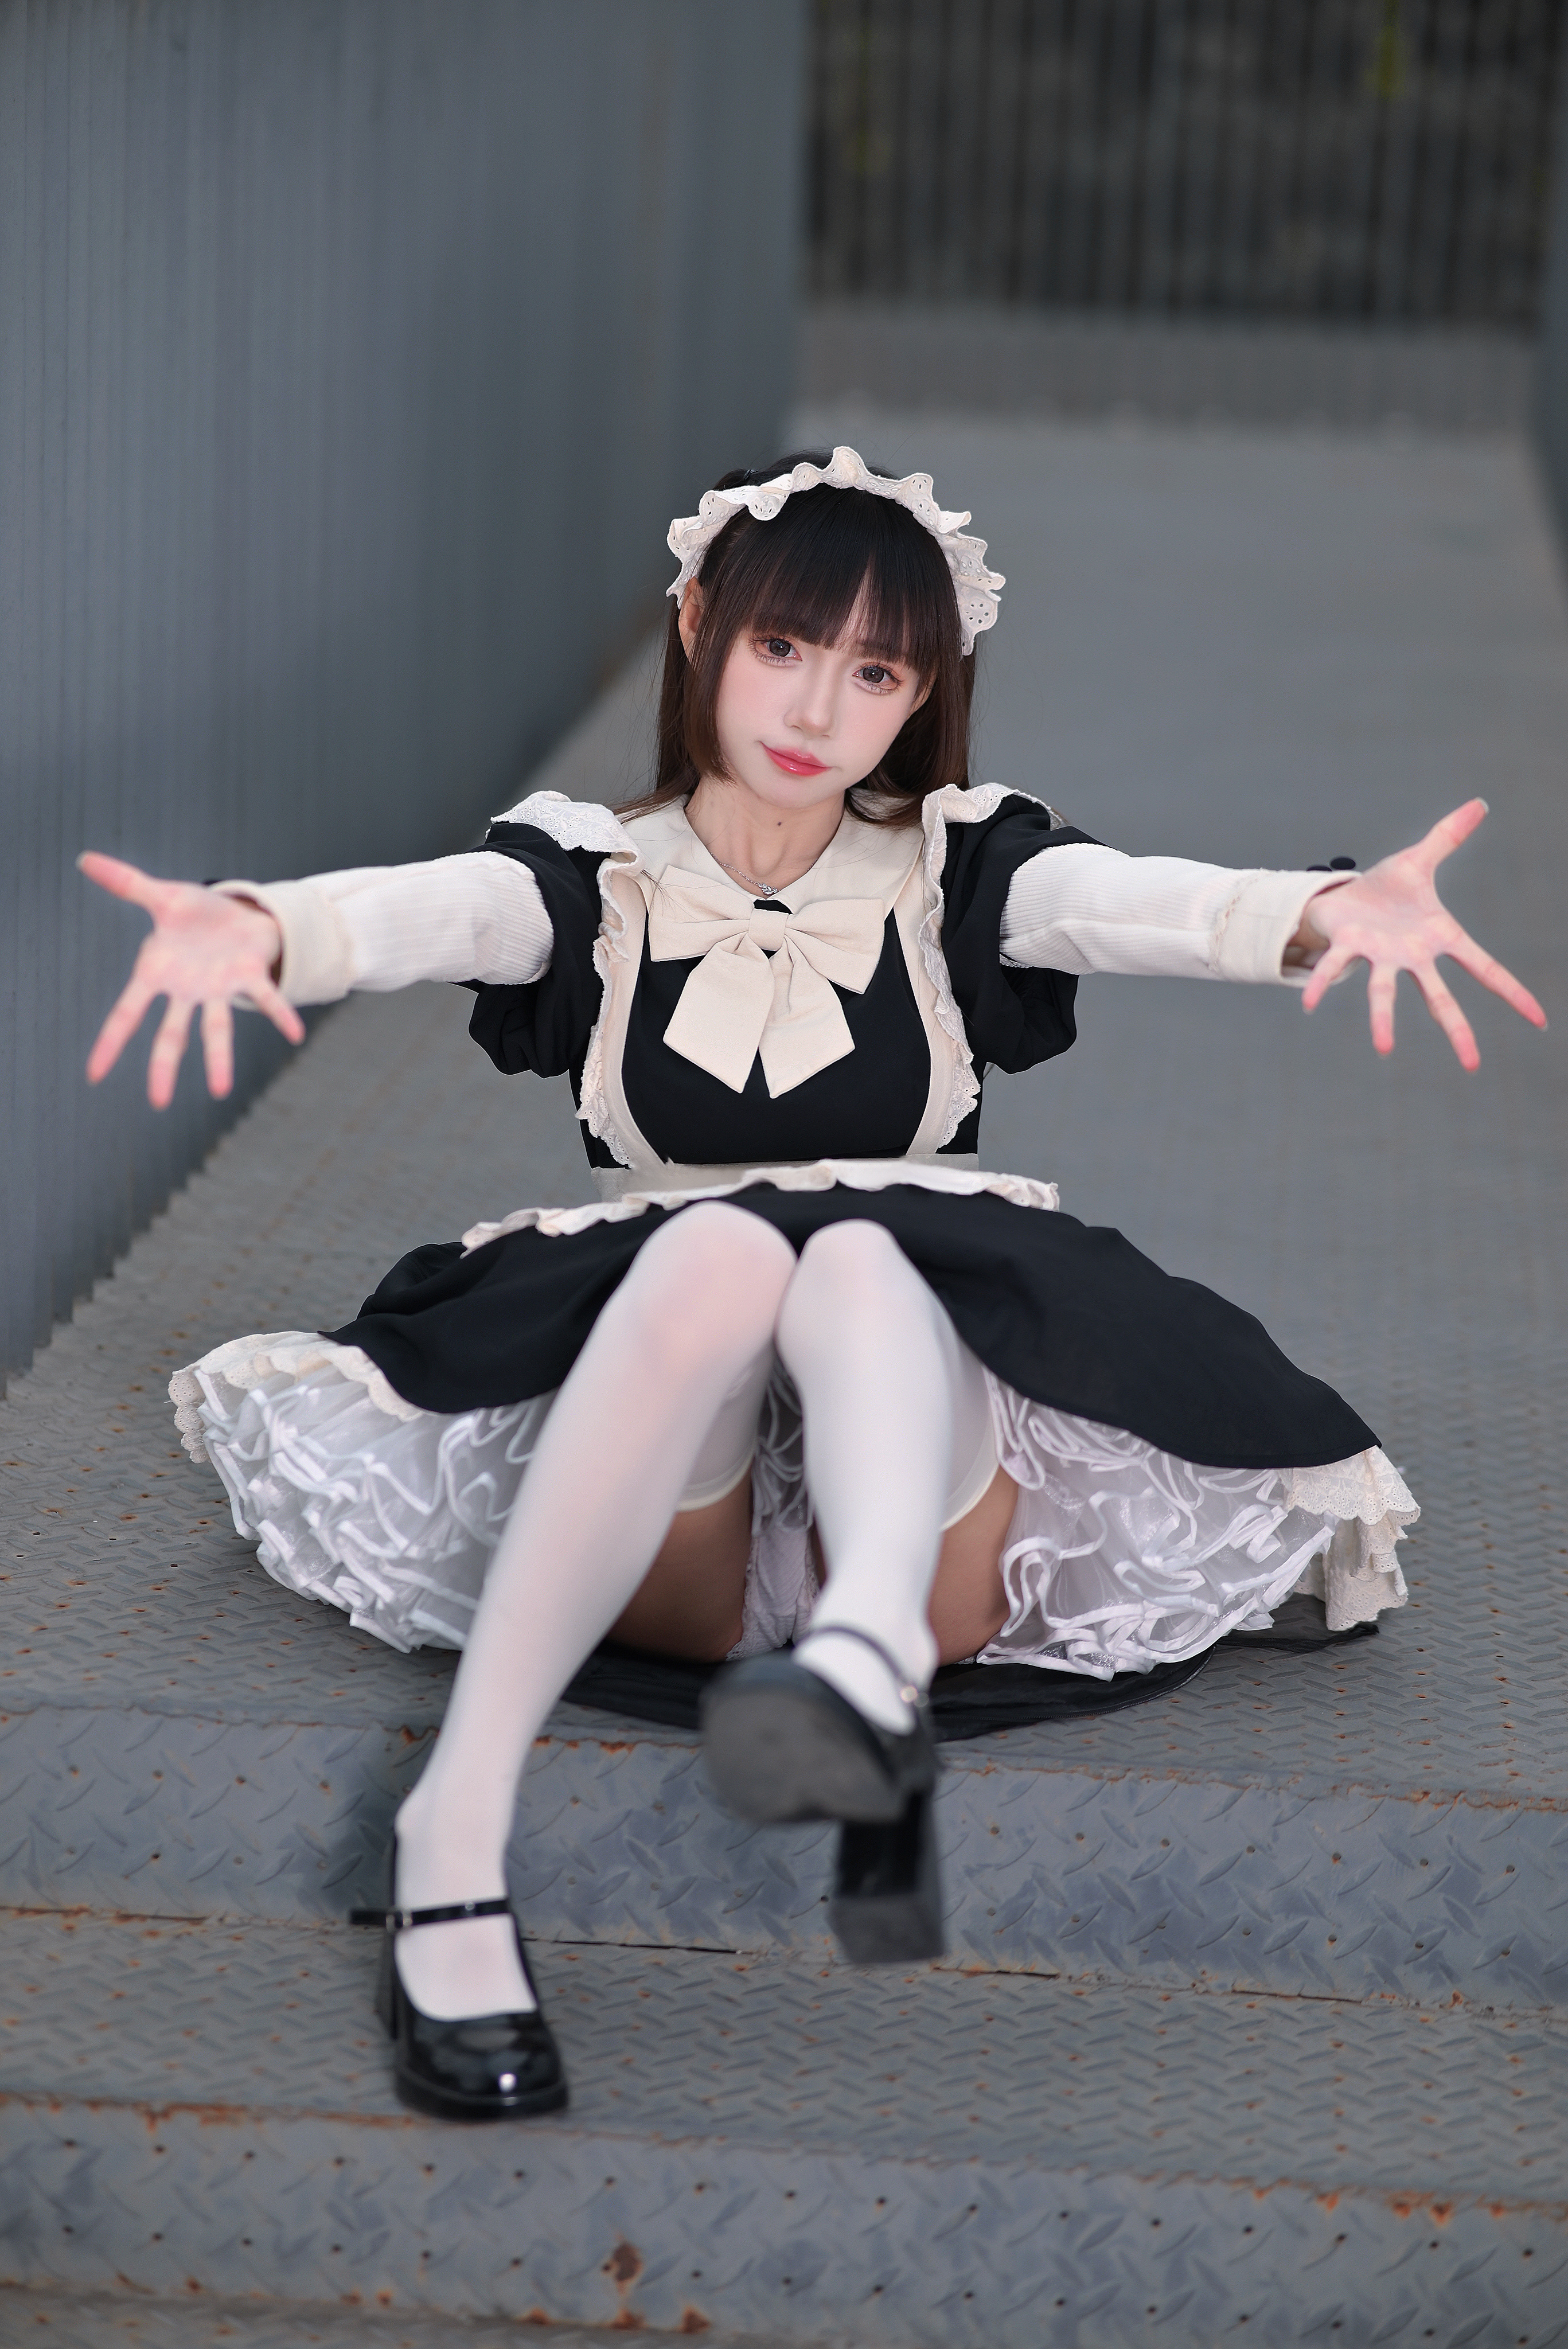 People 2734x4096 cosplay Asian women coserxmj arms reaching sitting looking at viewer shoe sole maid closed mouth maid outfit long sleeves depth of field brunette portrait display upskirt white stockings stockings steps